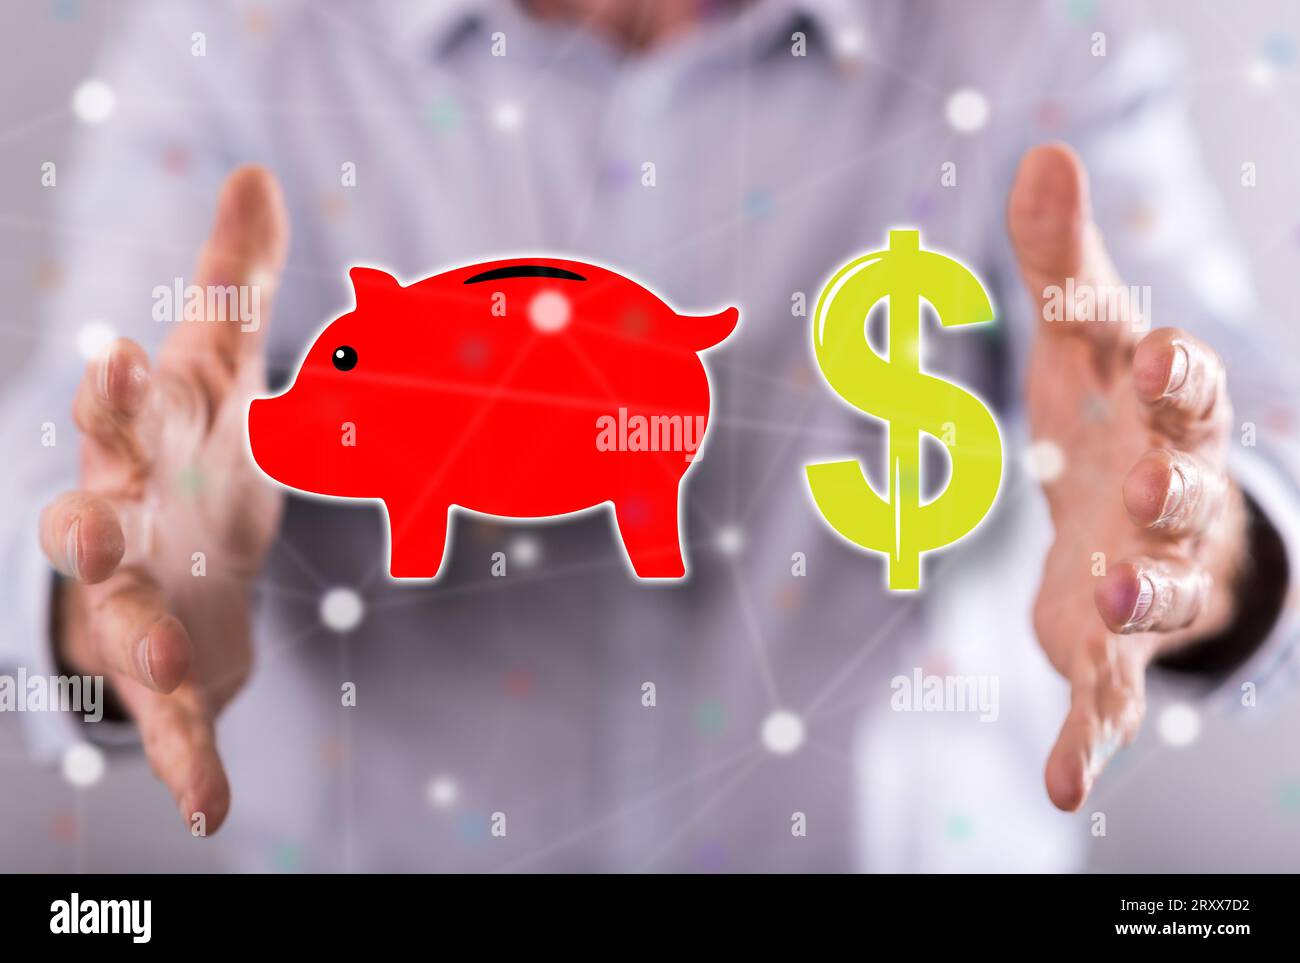 Money saving concept between hands of a man in background Stock Photo